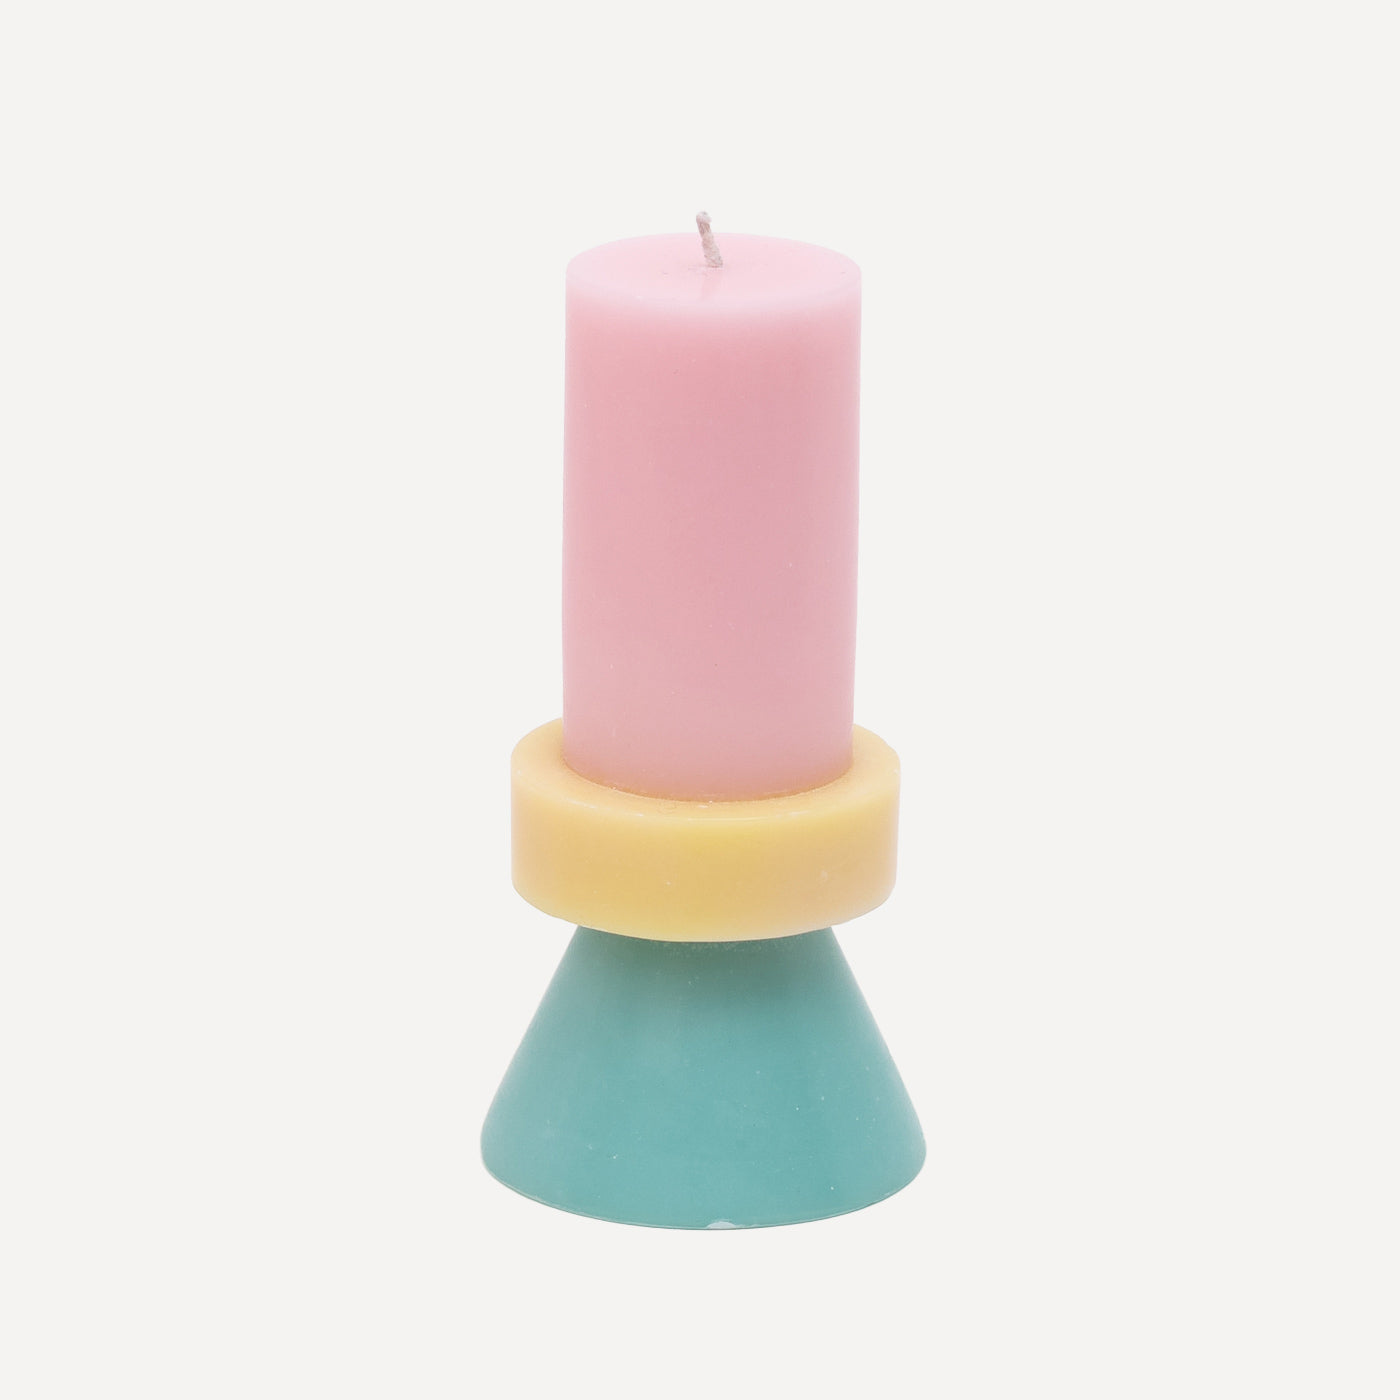 Stack Candle Tall, shaped candles by Yod and co in pink, yellow and turquoise